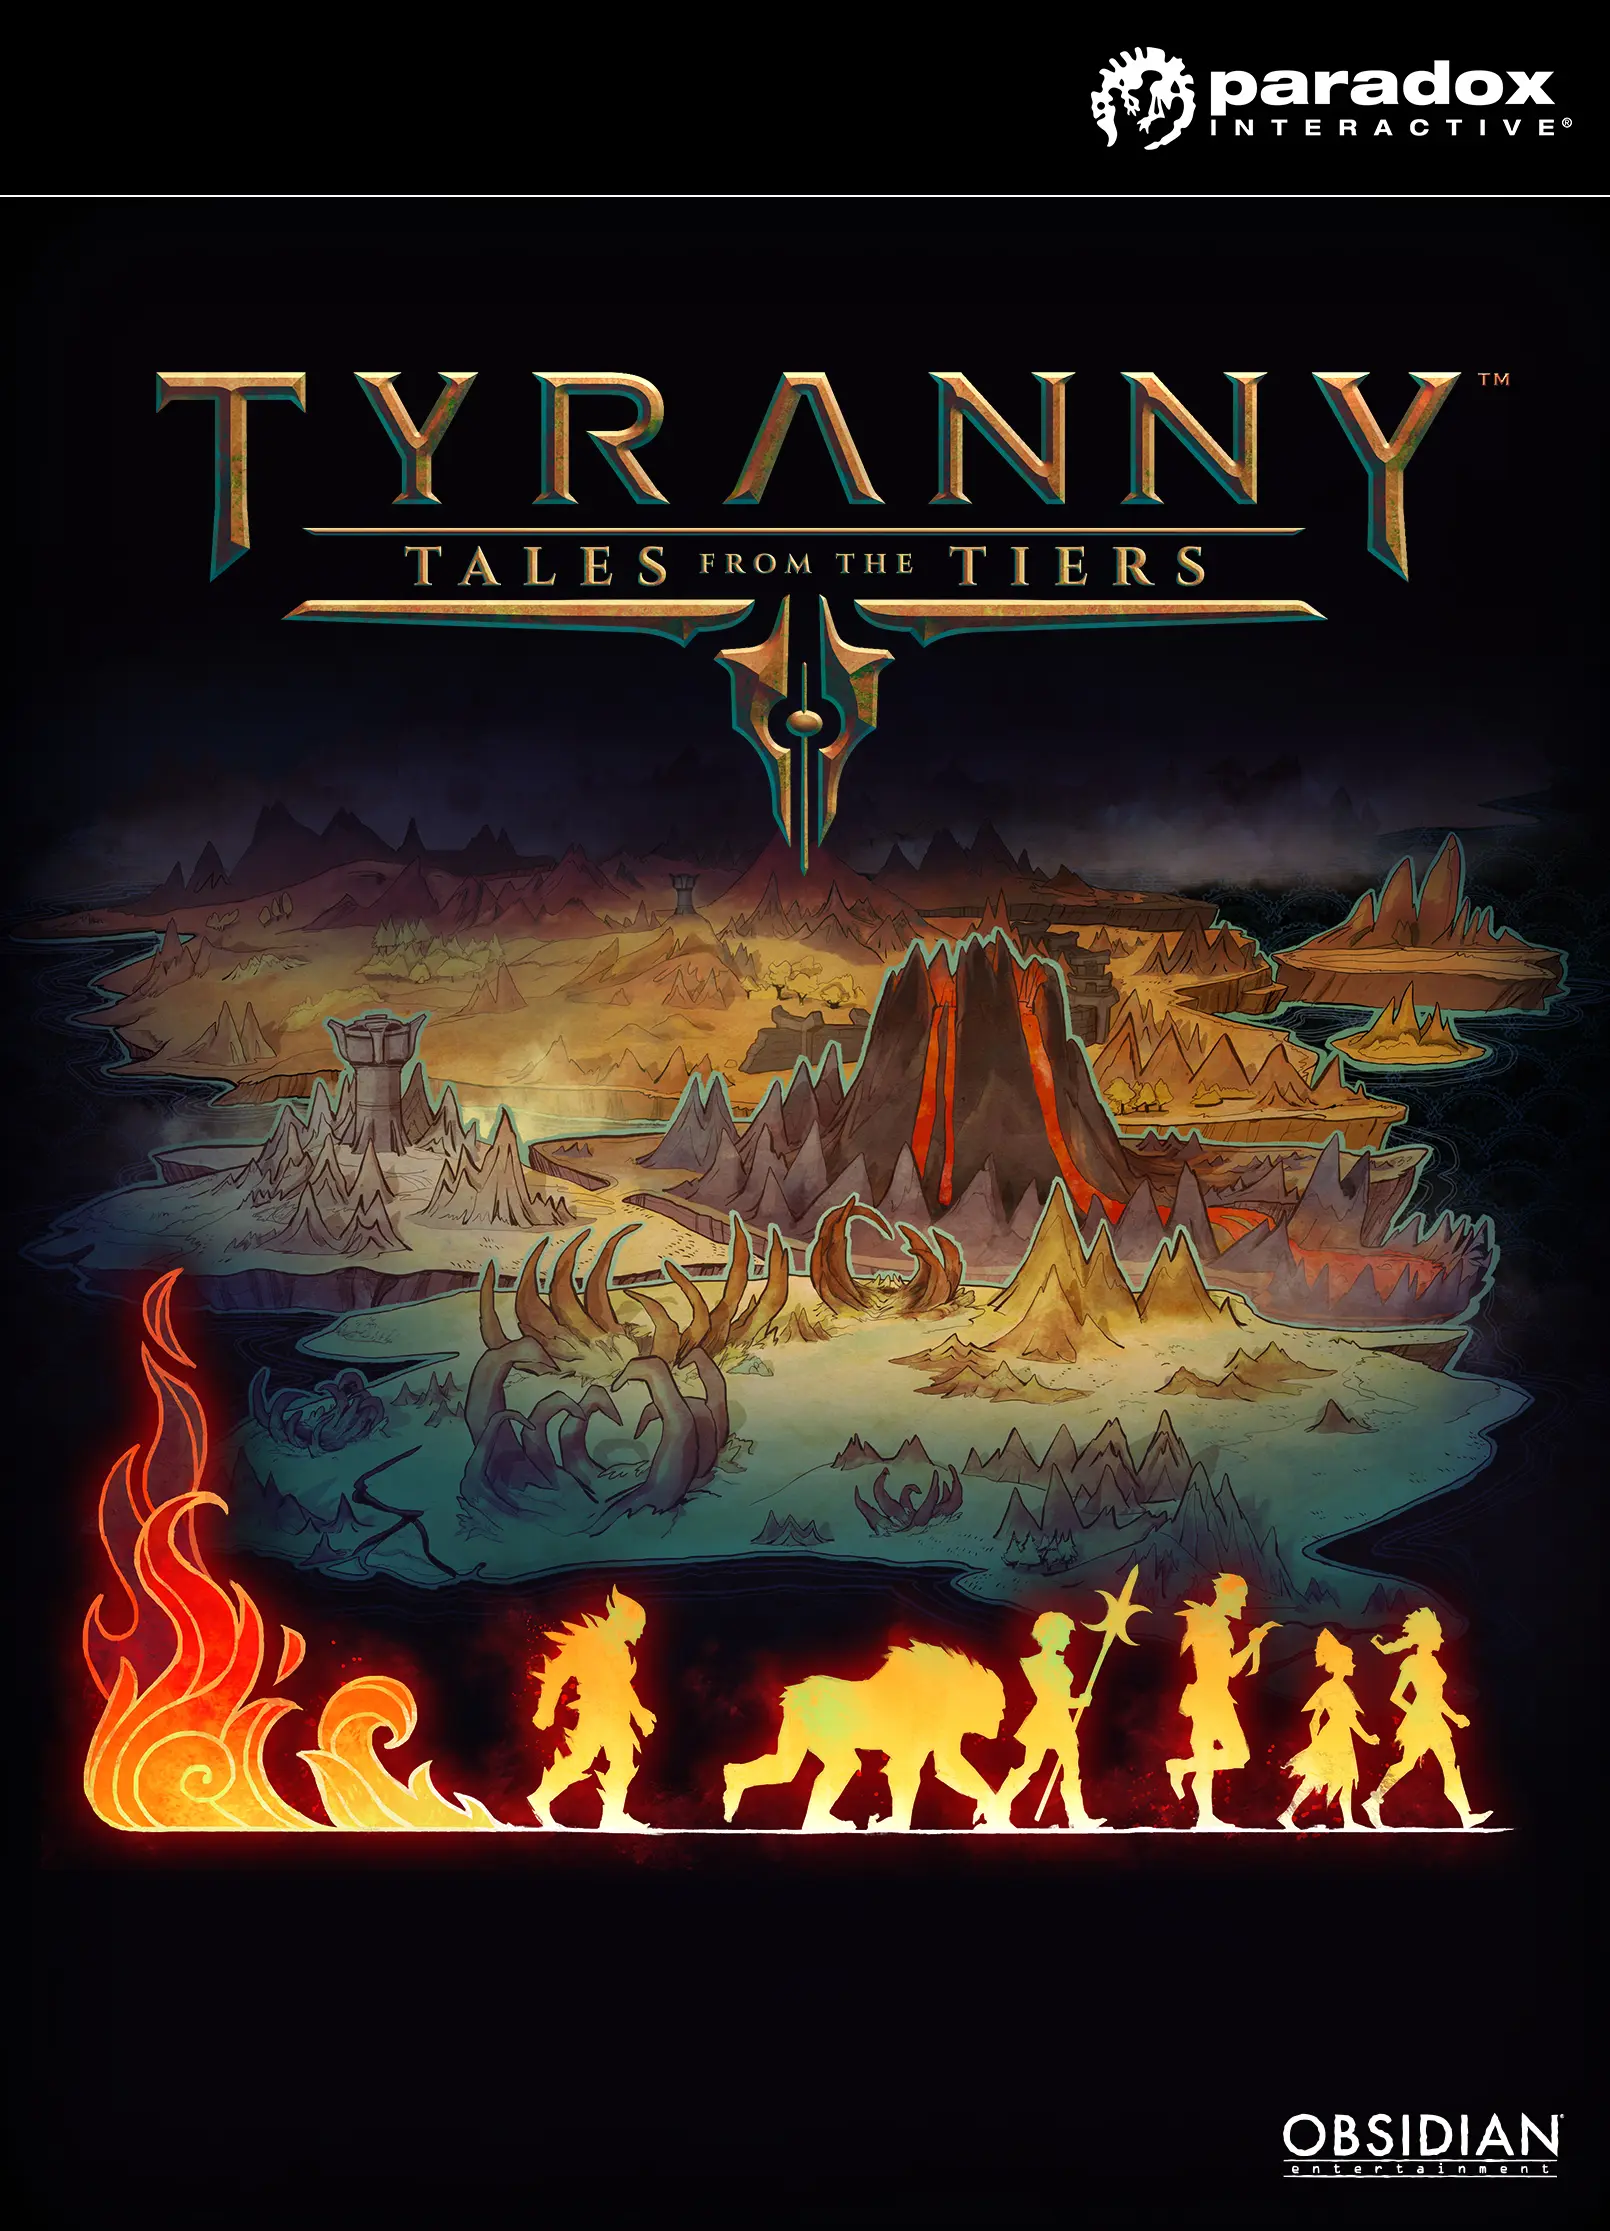 Tyranny - Tales from the Tiers DLC (PC / Mac / Linux) - Steam - Digital Code